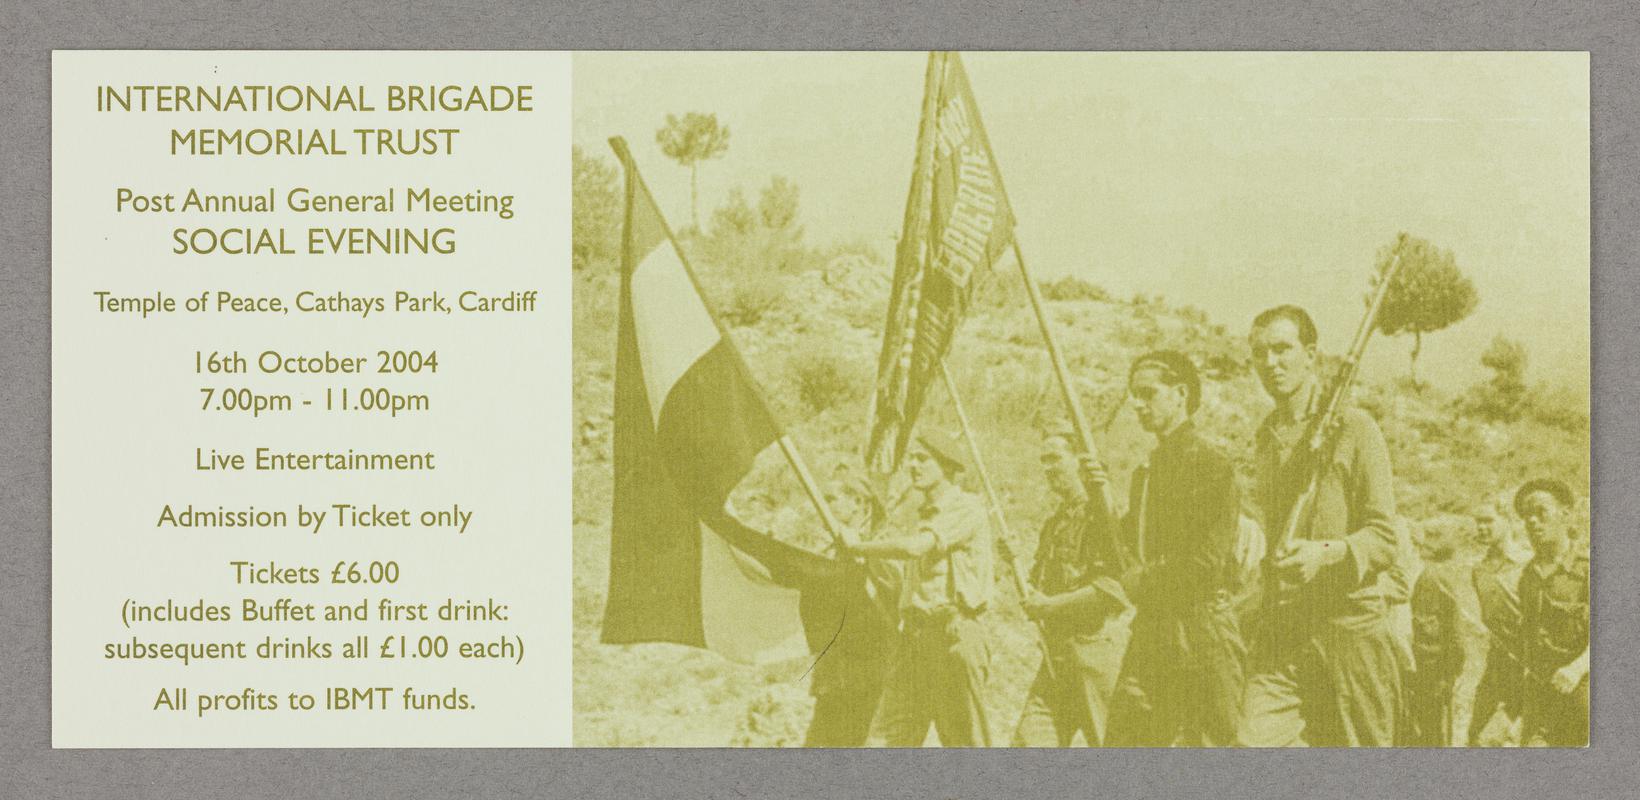 International Brigade Memorial Trust social evening ticket at the Temple of Peace, Cathays Park, Cardiff on 16th October 2004.

Green print on cream card.